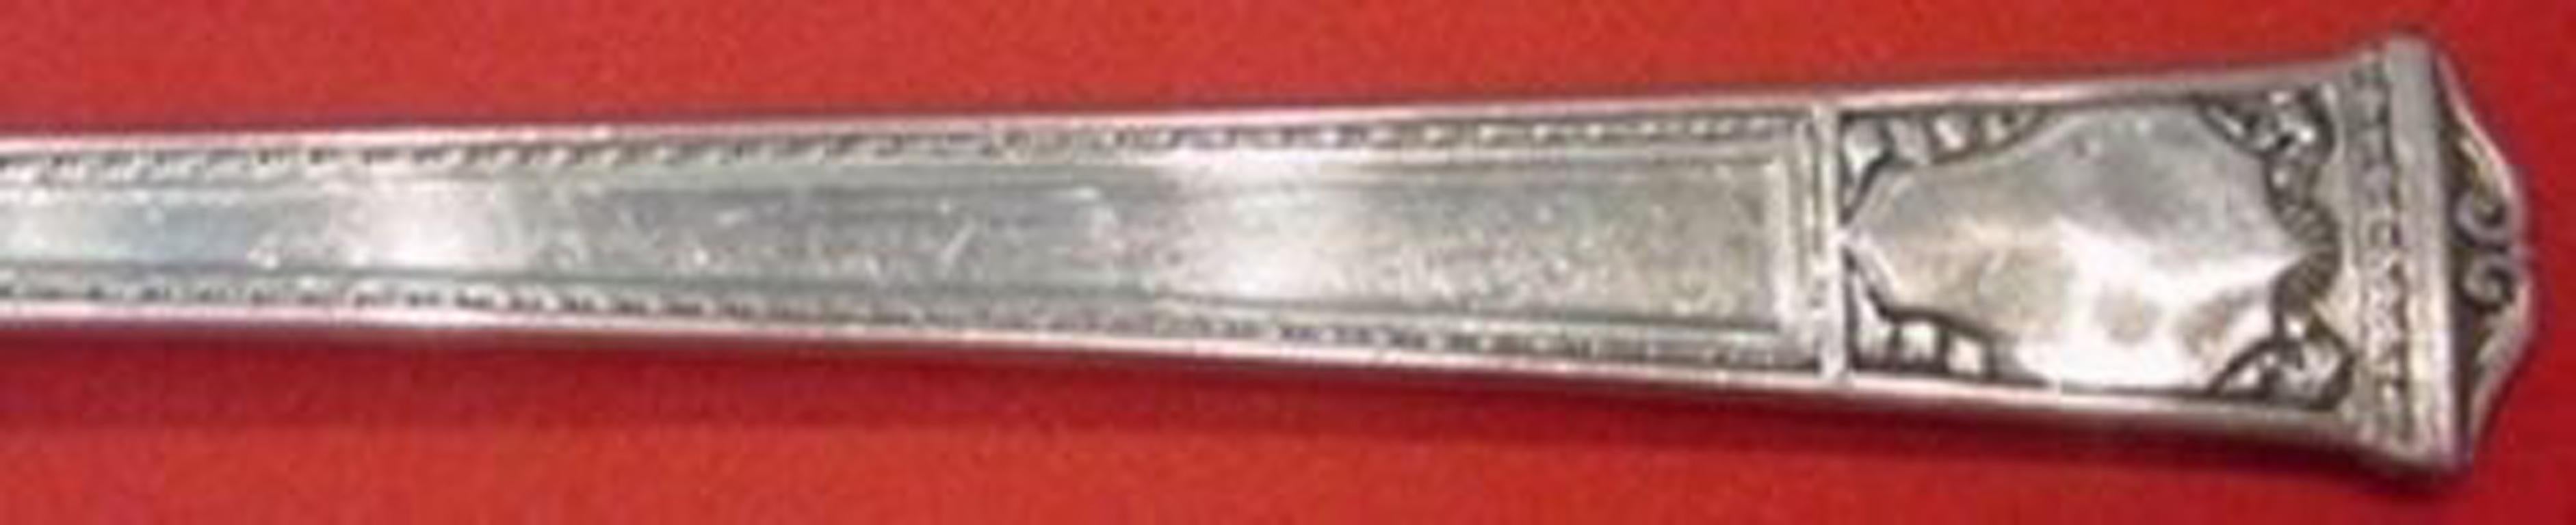 Sterling silver piccalilli spoon custom made 5 5/8